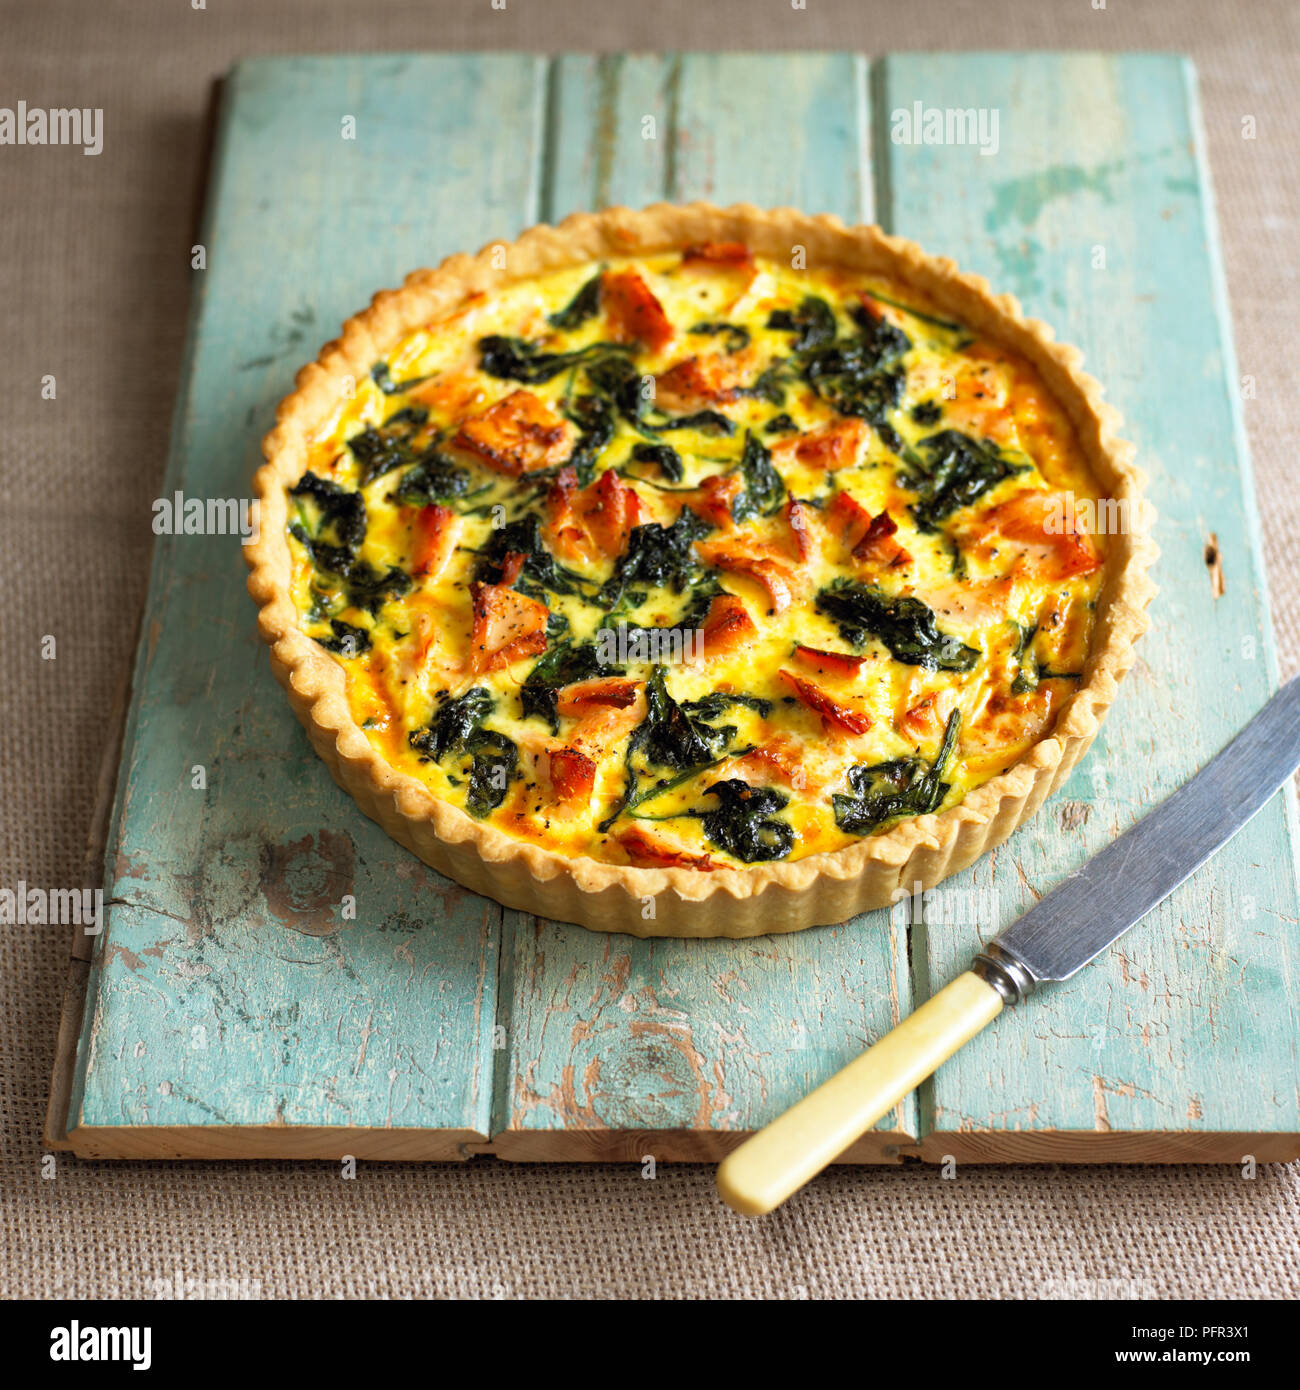 Salmon and spinach quiche on wooden board, knife nearby Stock Photo